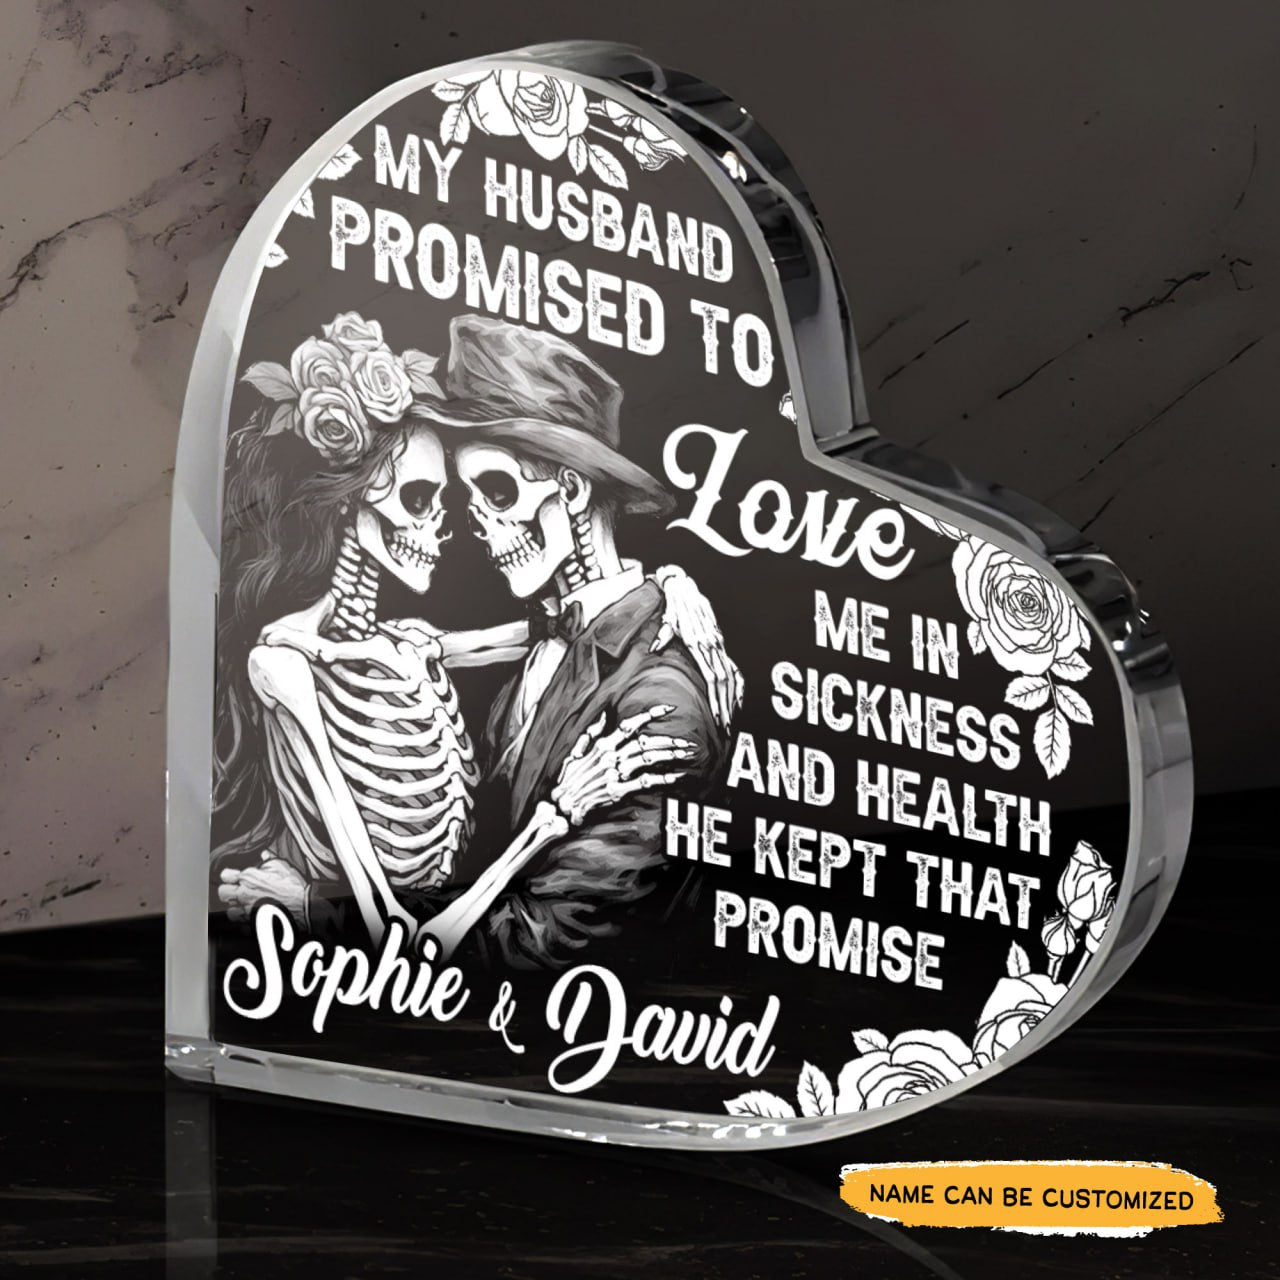 Promised To Love - Customized Skull Couple Crystal Heart Anniversary Gifts - Wonder Skull